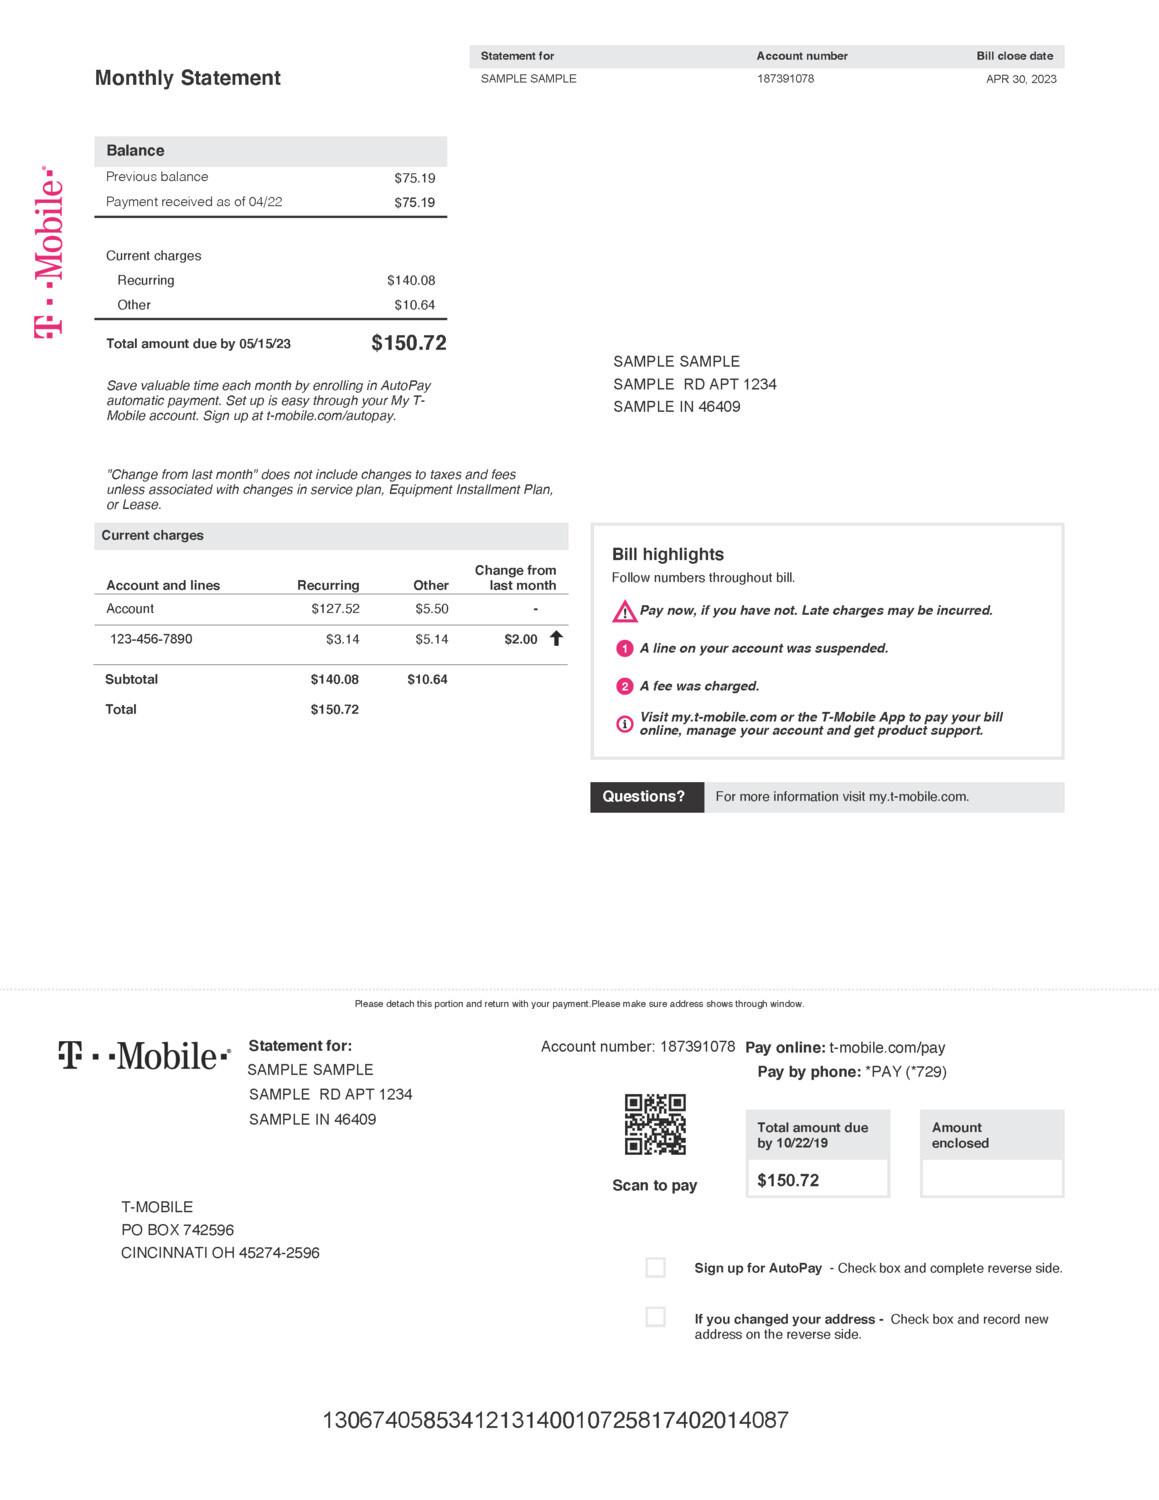 T-MOBILE CELL PHONE BILL CREATION